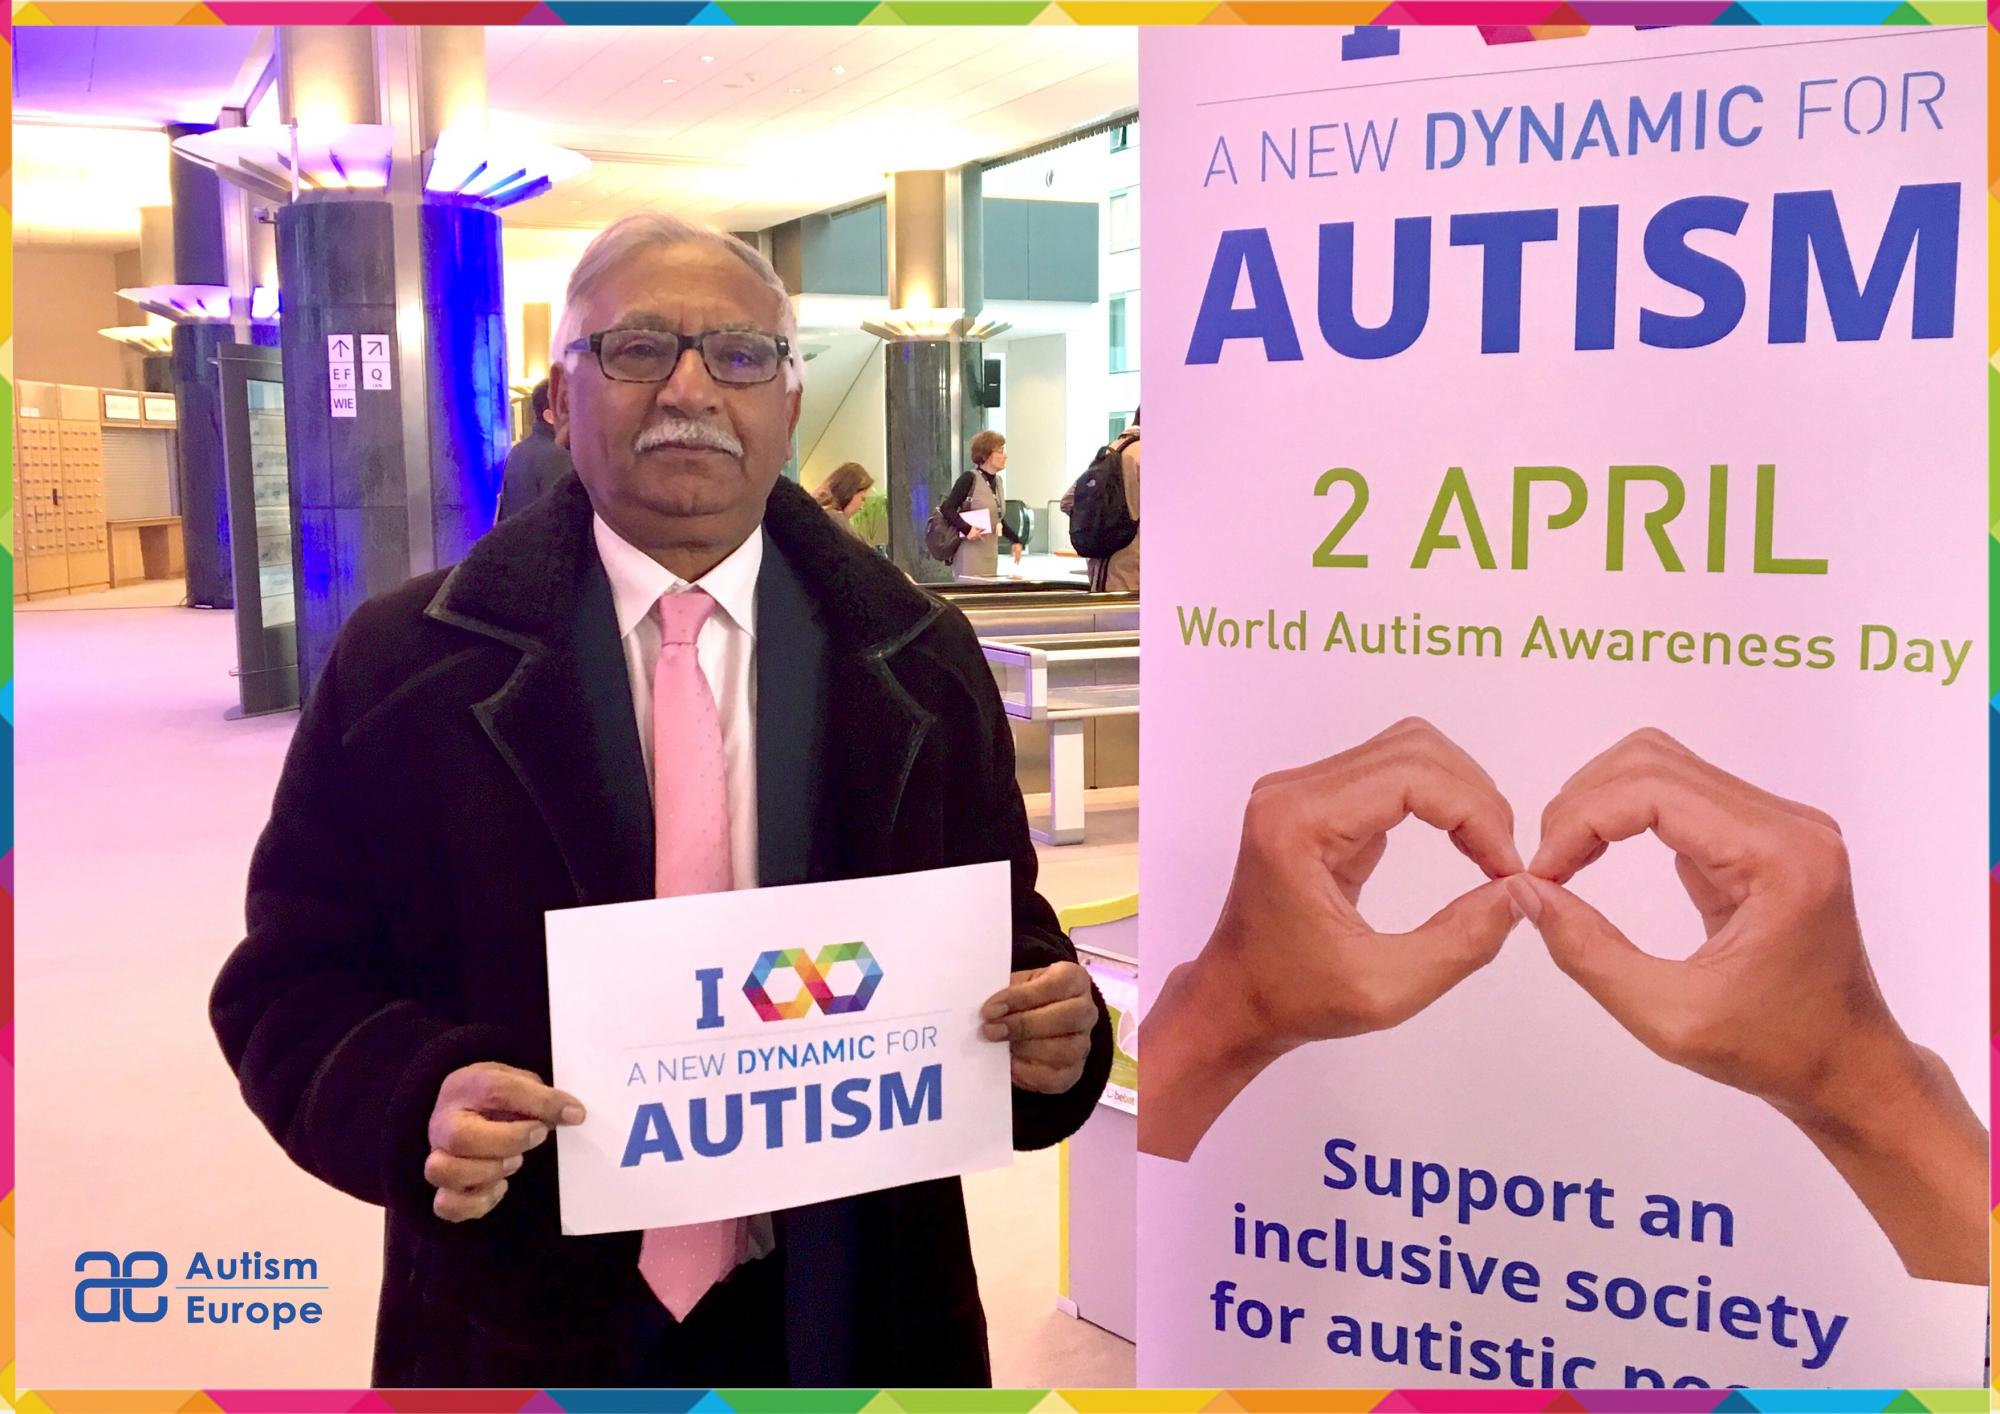 Amjad Bashir @AmjadBashirMEP · Apr 4, 2019 Proud to take part in the awareness campaing "A New Dynamic for Autism" 